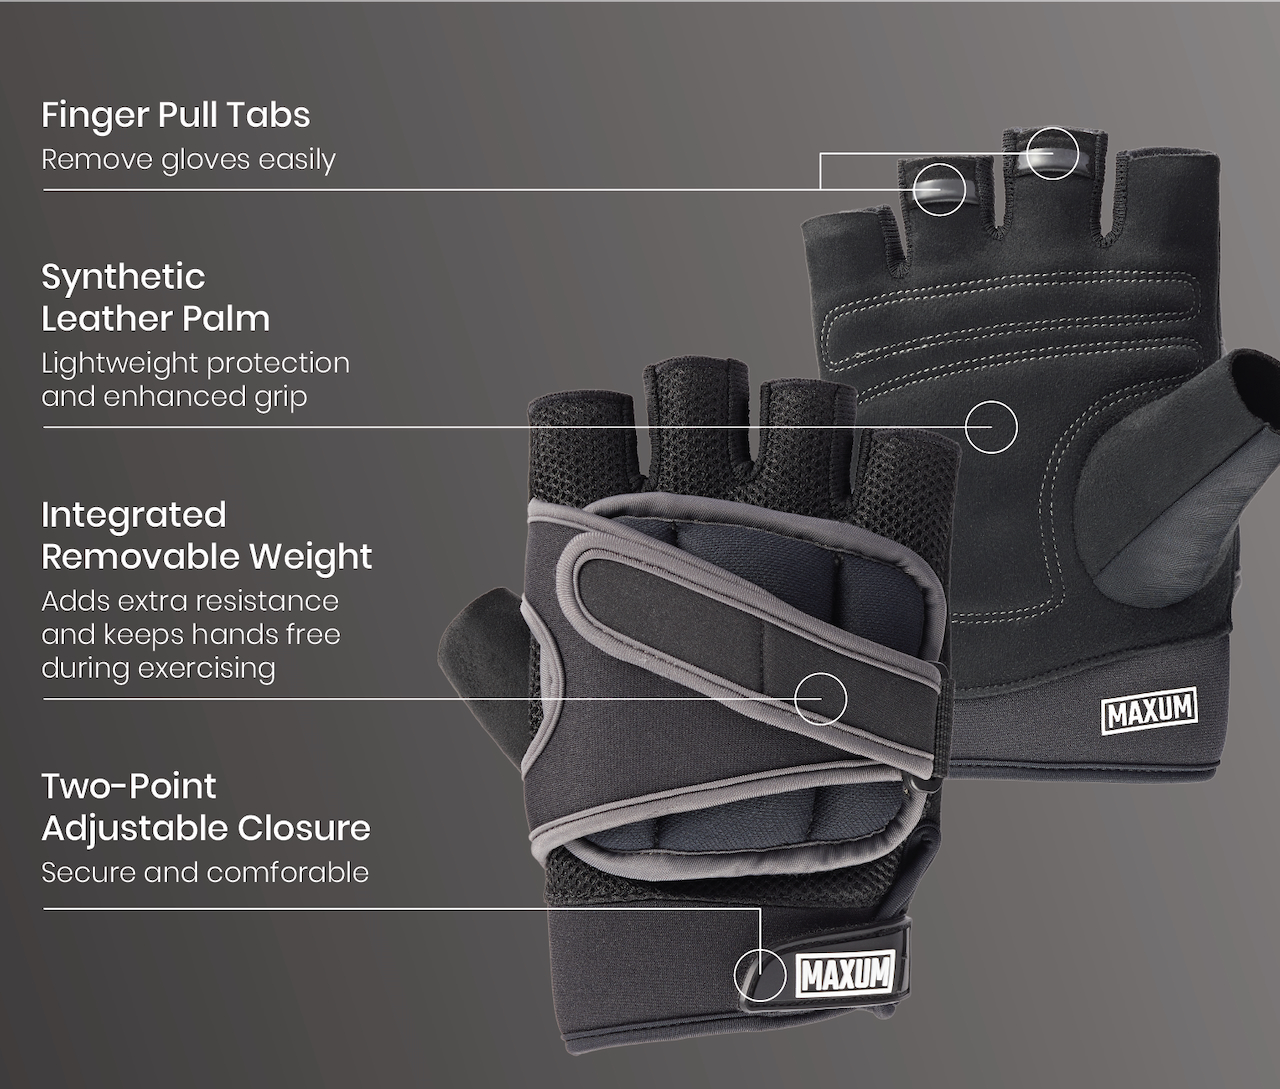 Weighted Gloves 1 lb - 5